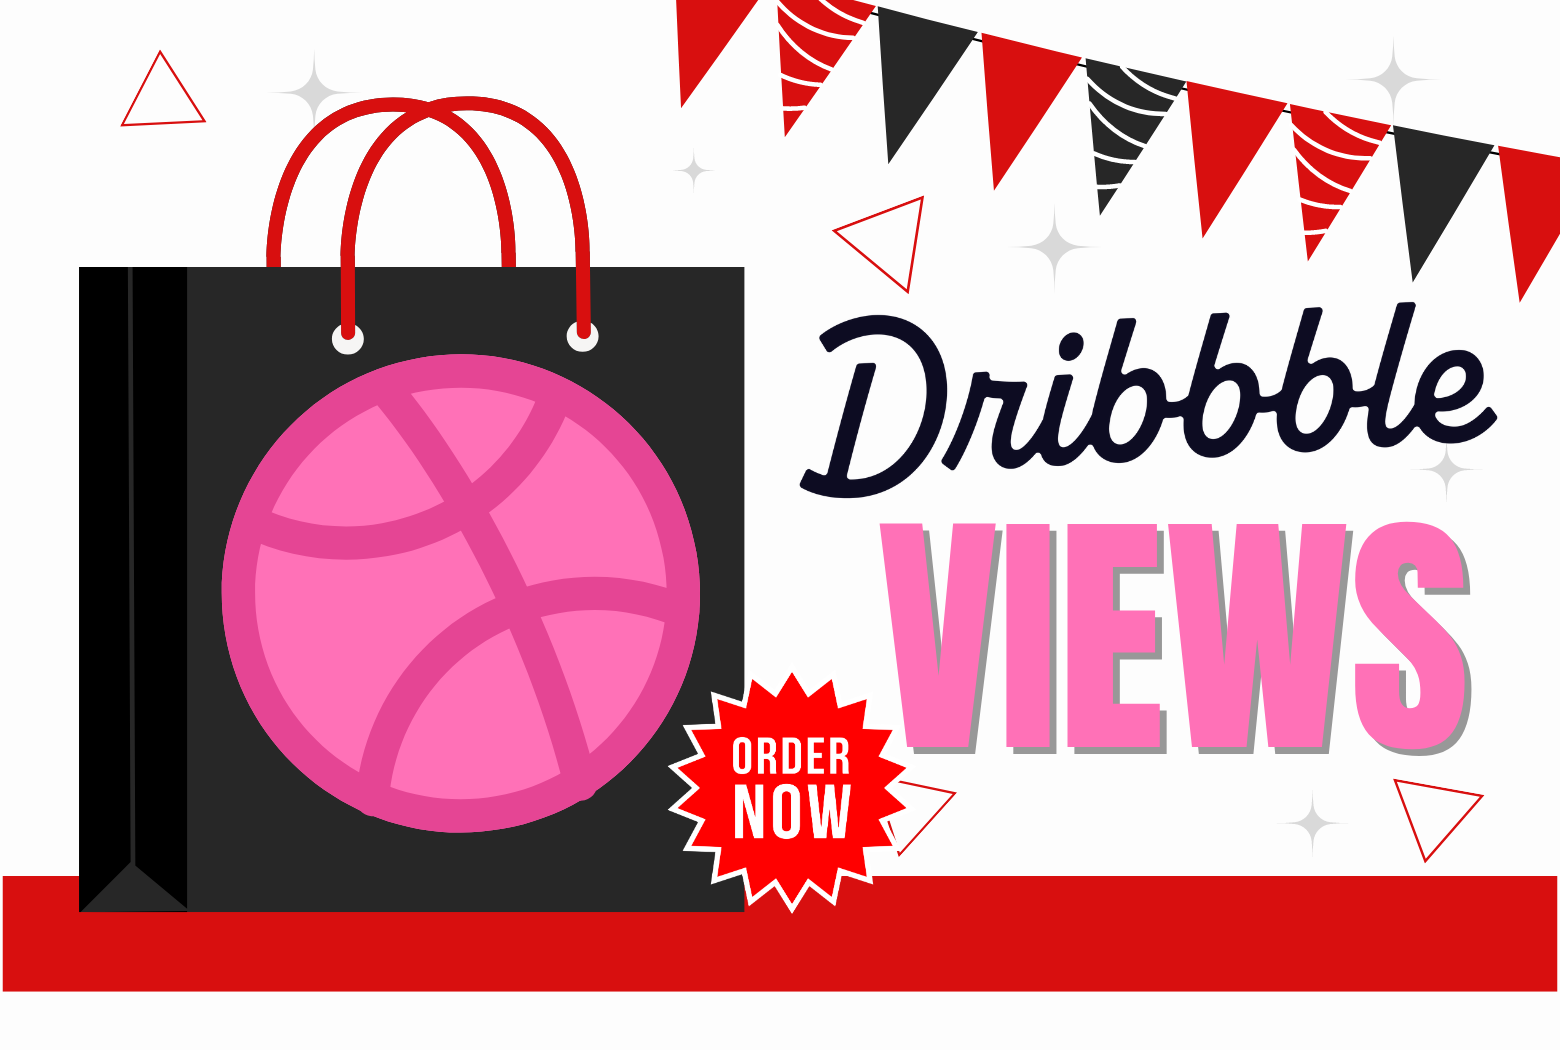 1000 Views on Dribbble | Dribbble Promotion